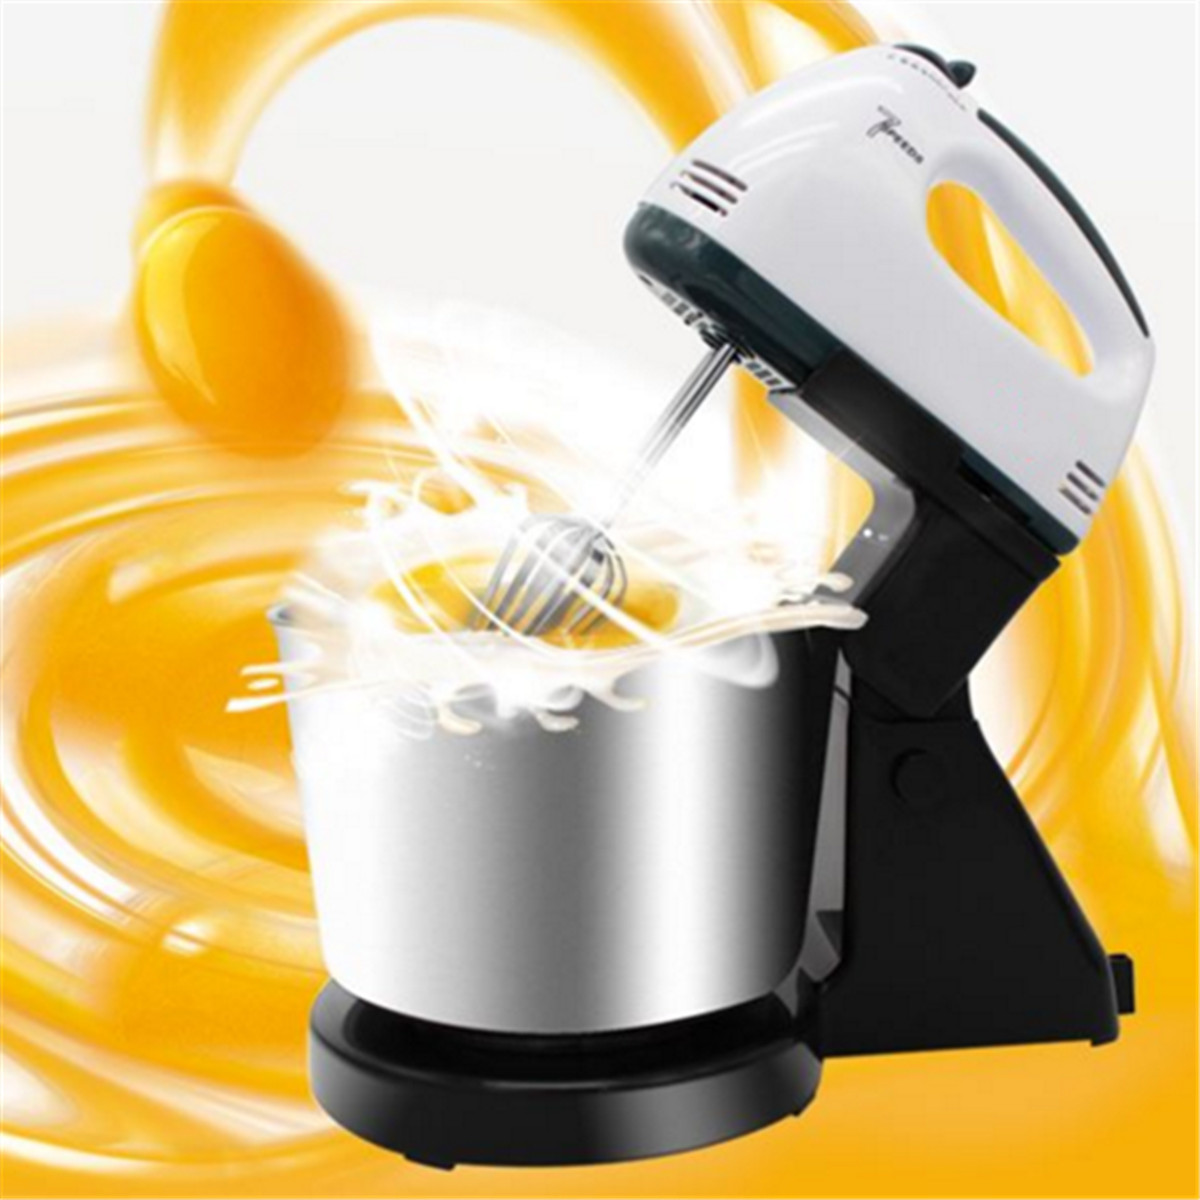 7 Speed Electric Egg Beater Dough Cakes Bread Egg Stand Mixer + Hand Blender + Bowl Food Mixer Kitchen Accessories Egg Tools 73